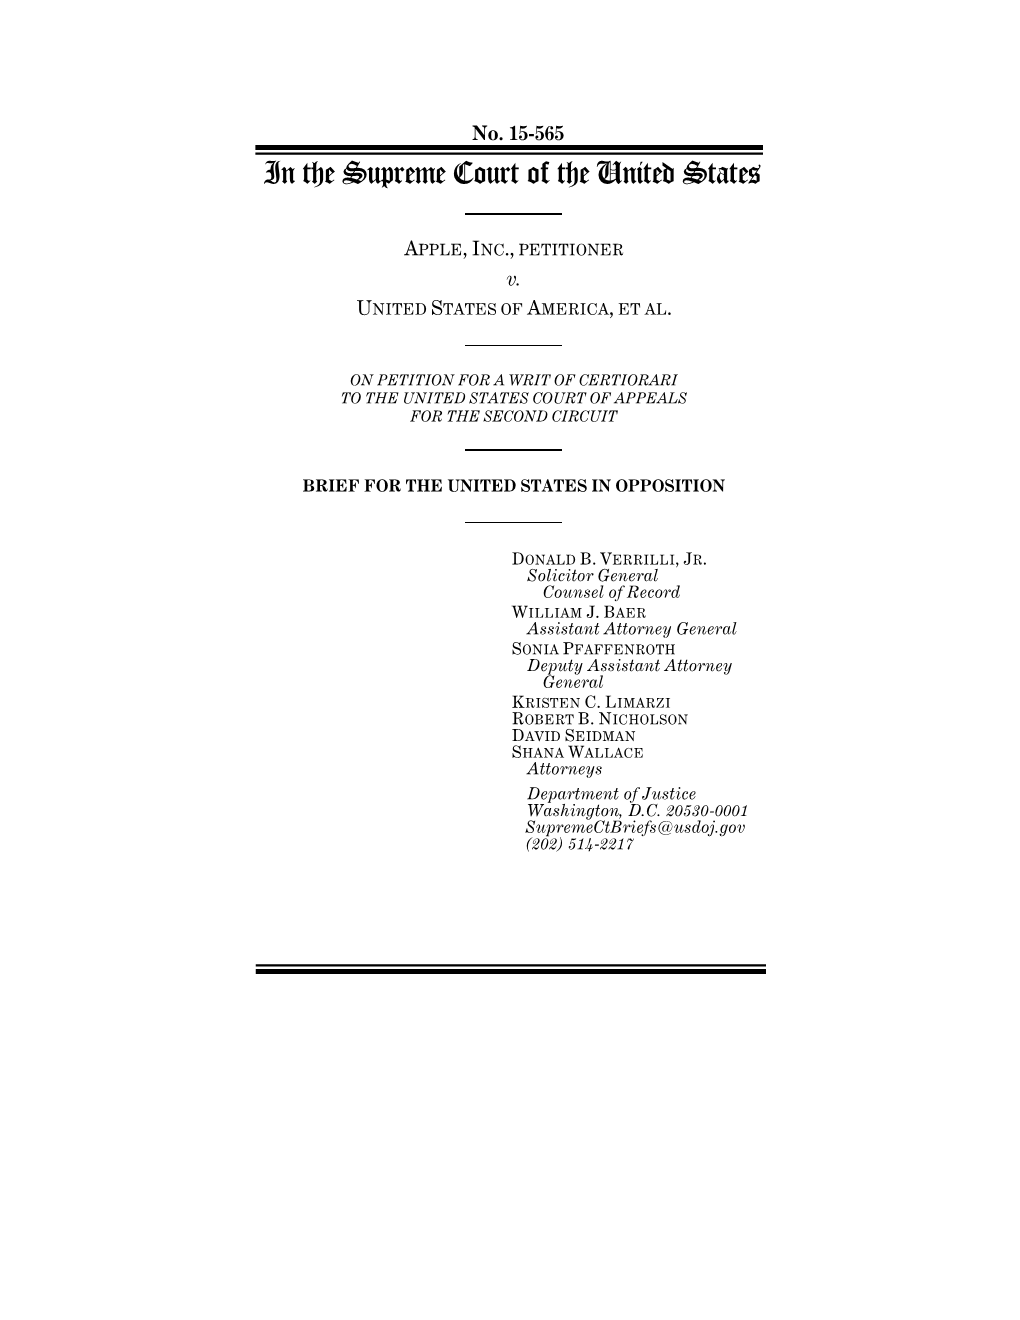 Brief for the United States in Opposition: U.S. V. Apple, Inc., Et